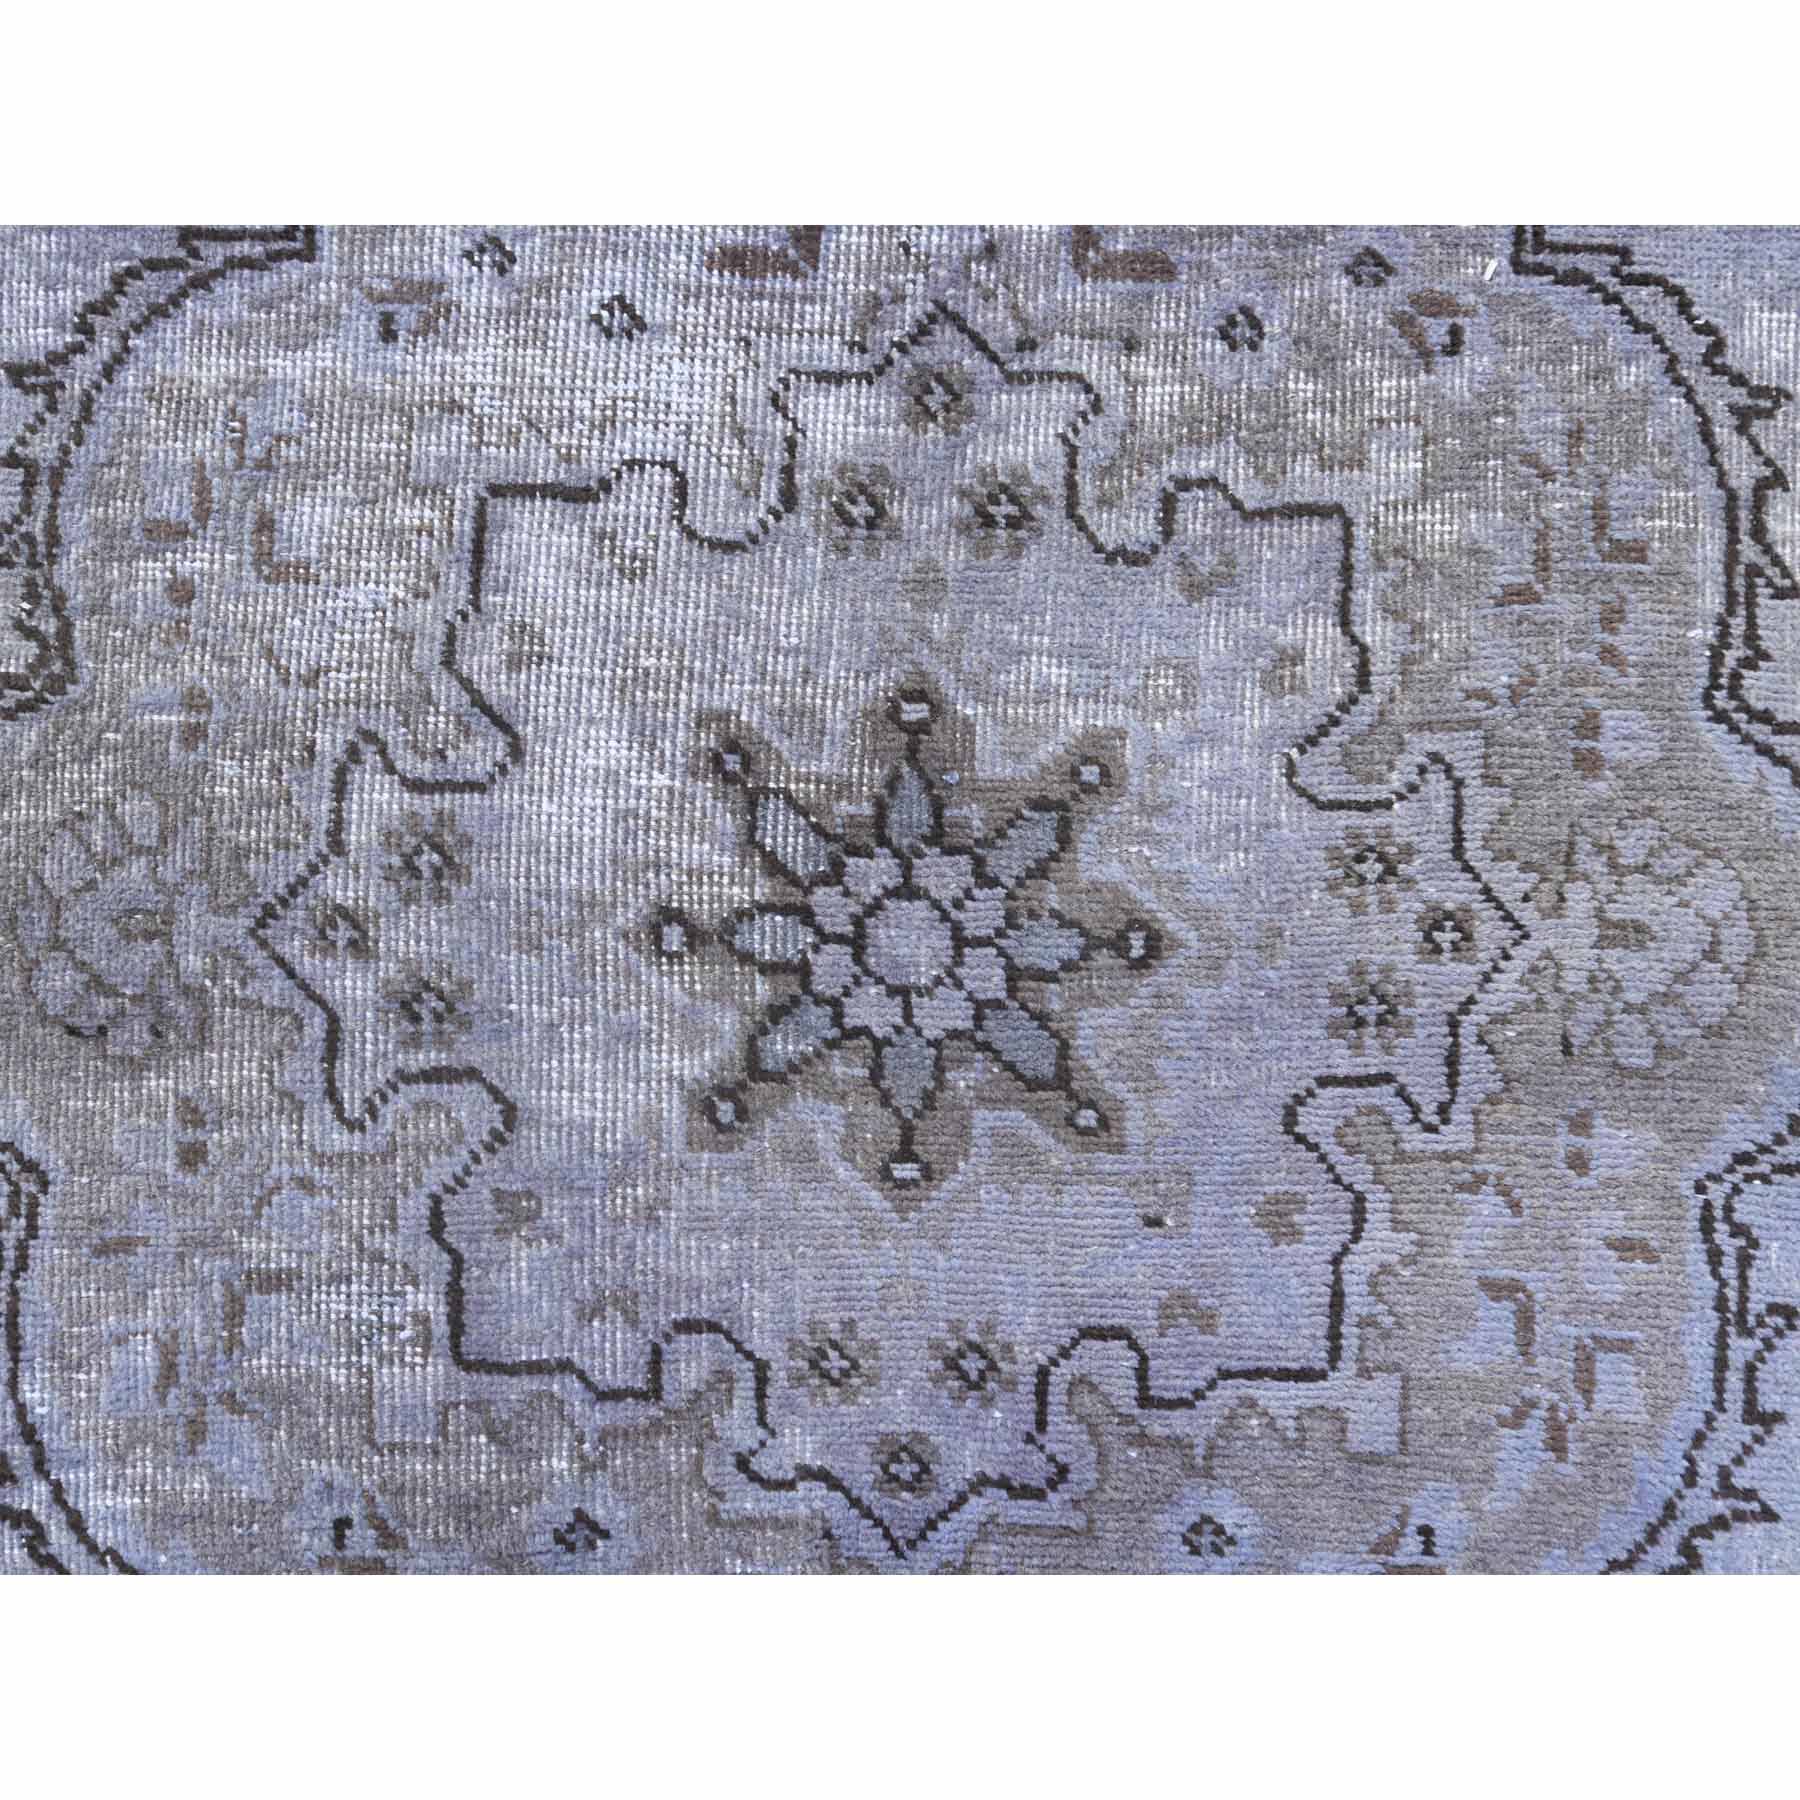 Overdyed-Vintage-Hand-Knotted-Rug-307990